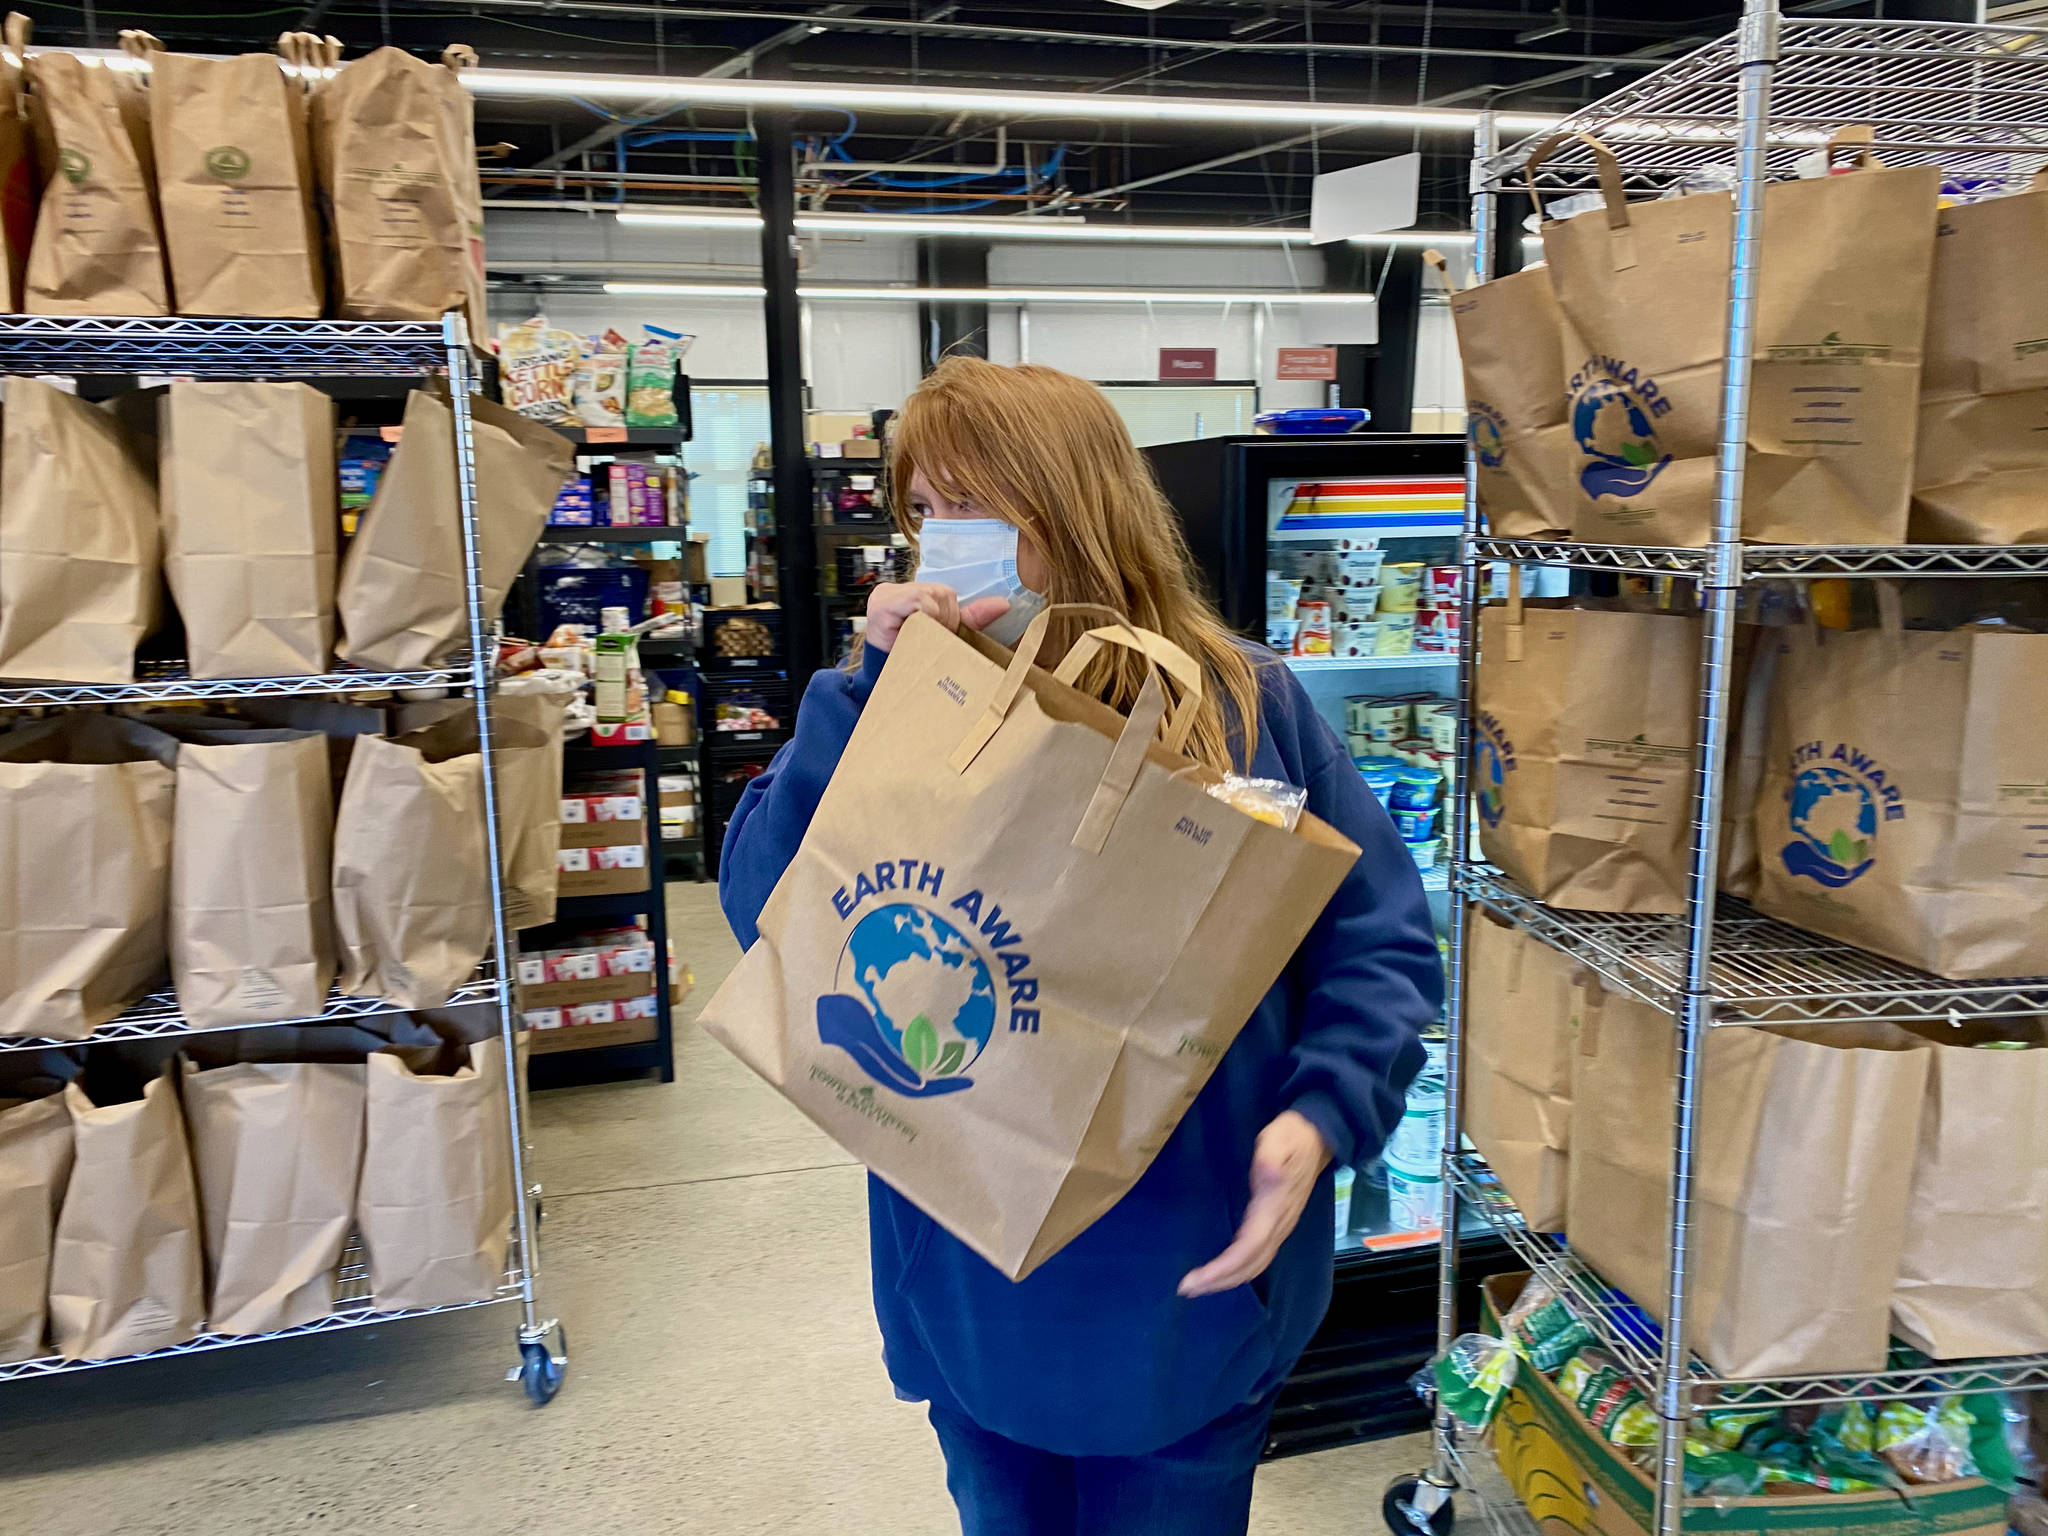 Fishline had over 400 volunteers before the first COVID shutdown. Now they have 130 volunteers packaging and delivering food to those in need. Ken Park/North Kitsap Herald photos